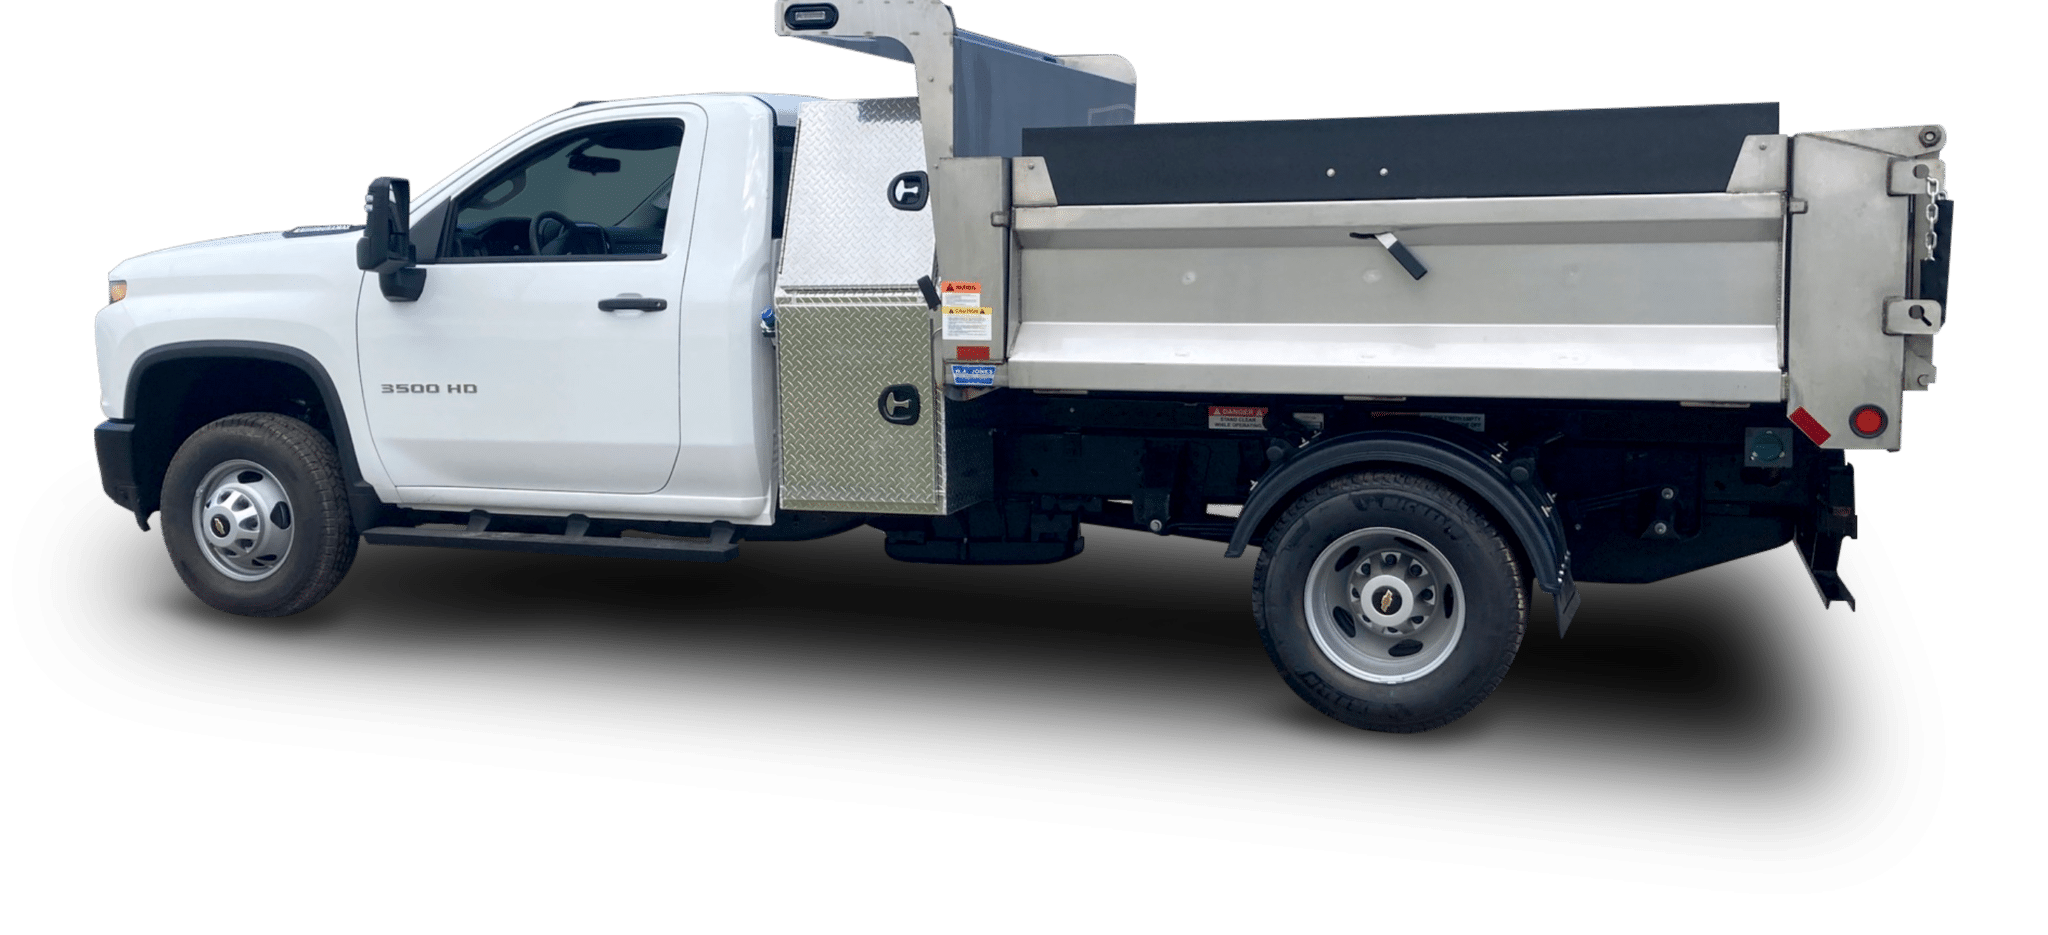 Stainless steel dump bed for truck